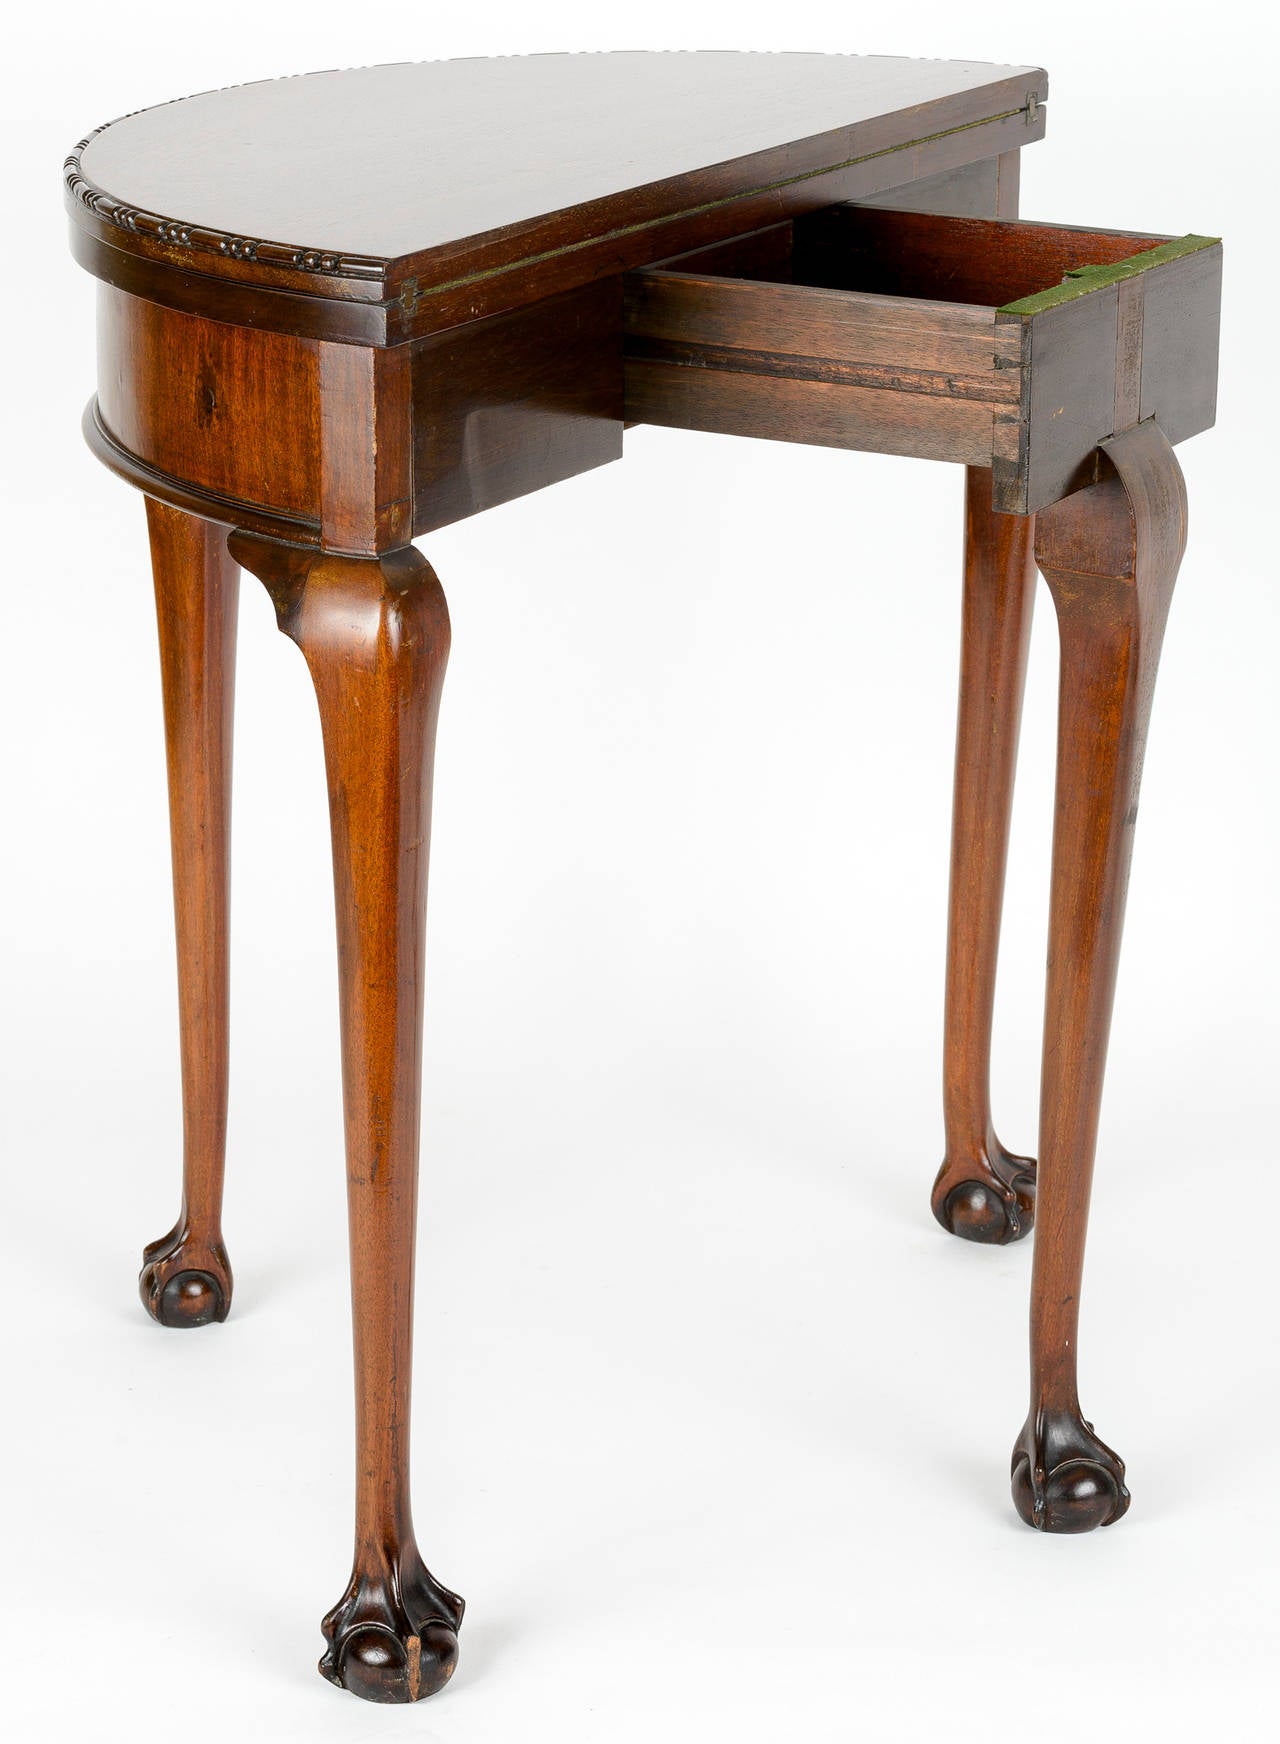 Great Britain (UK) Period George III Demilune Game Table